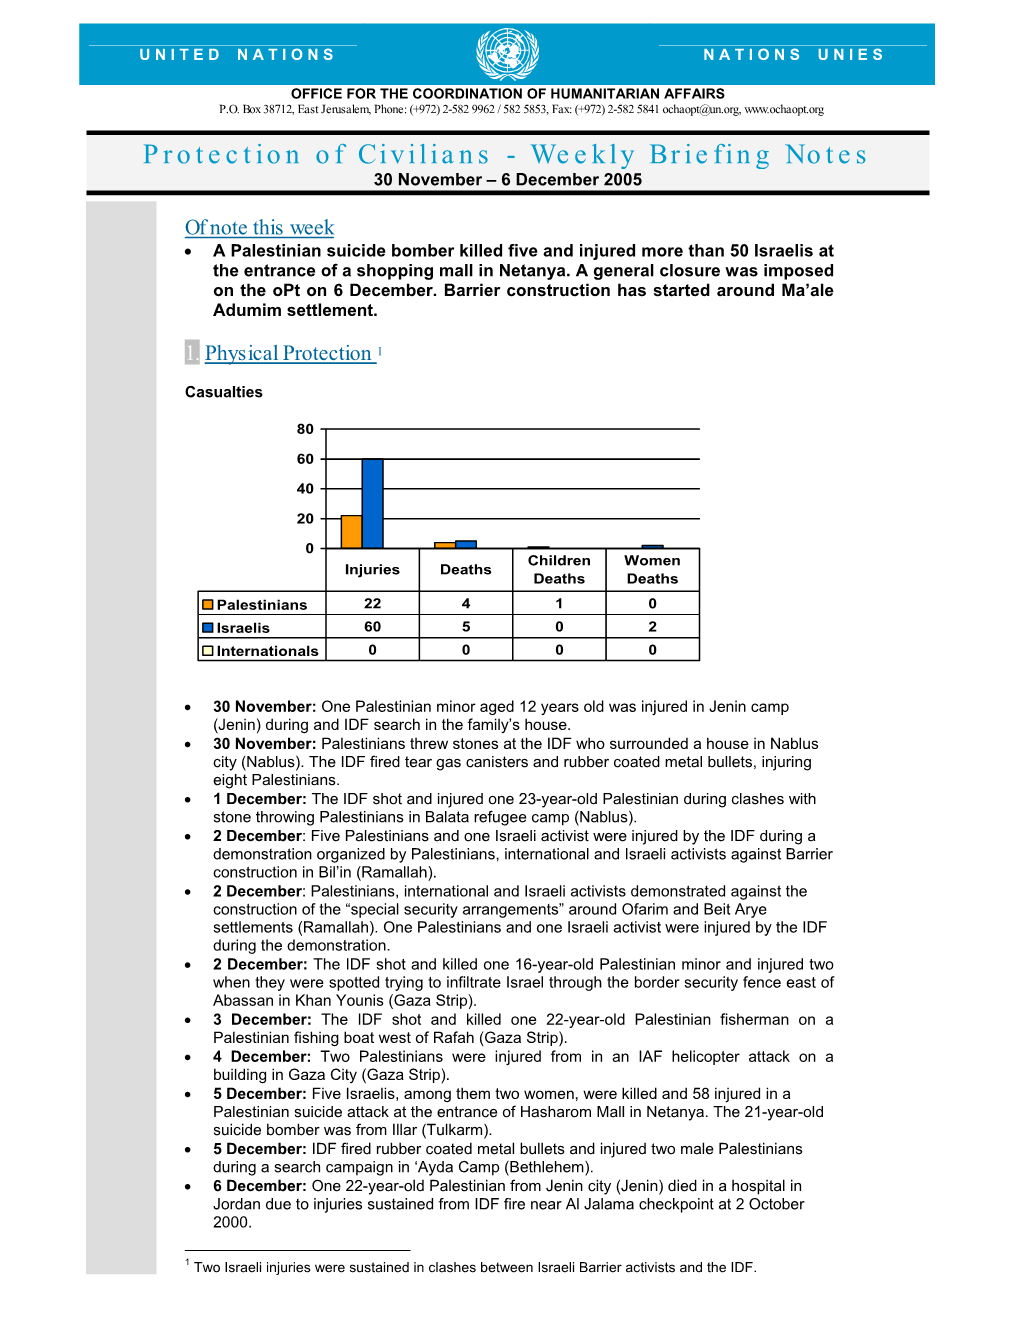 Protection of Civilians - Weekly Briefing Notes 30 November – 6 December 2005